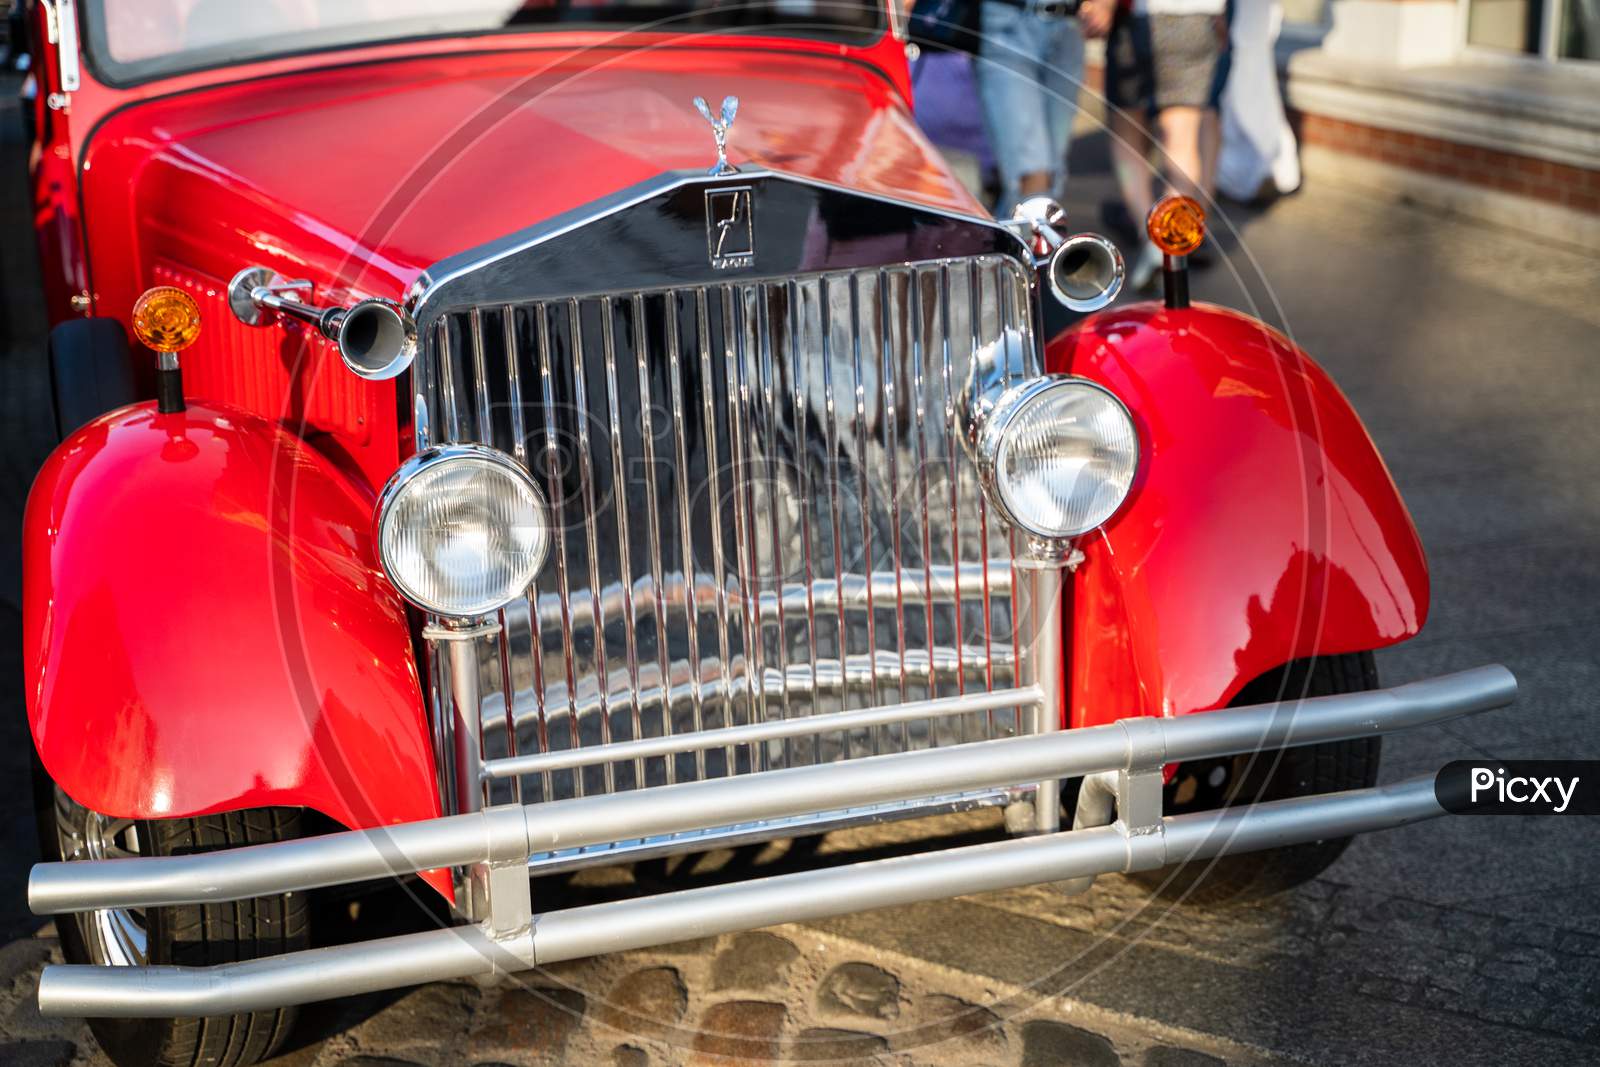 Gdansk, North Poland - August 13, 2020: Close Up Of A Red Vintage Car Front Parked In A City Center Main Square